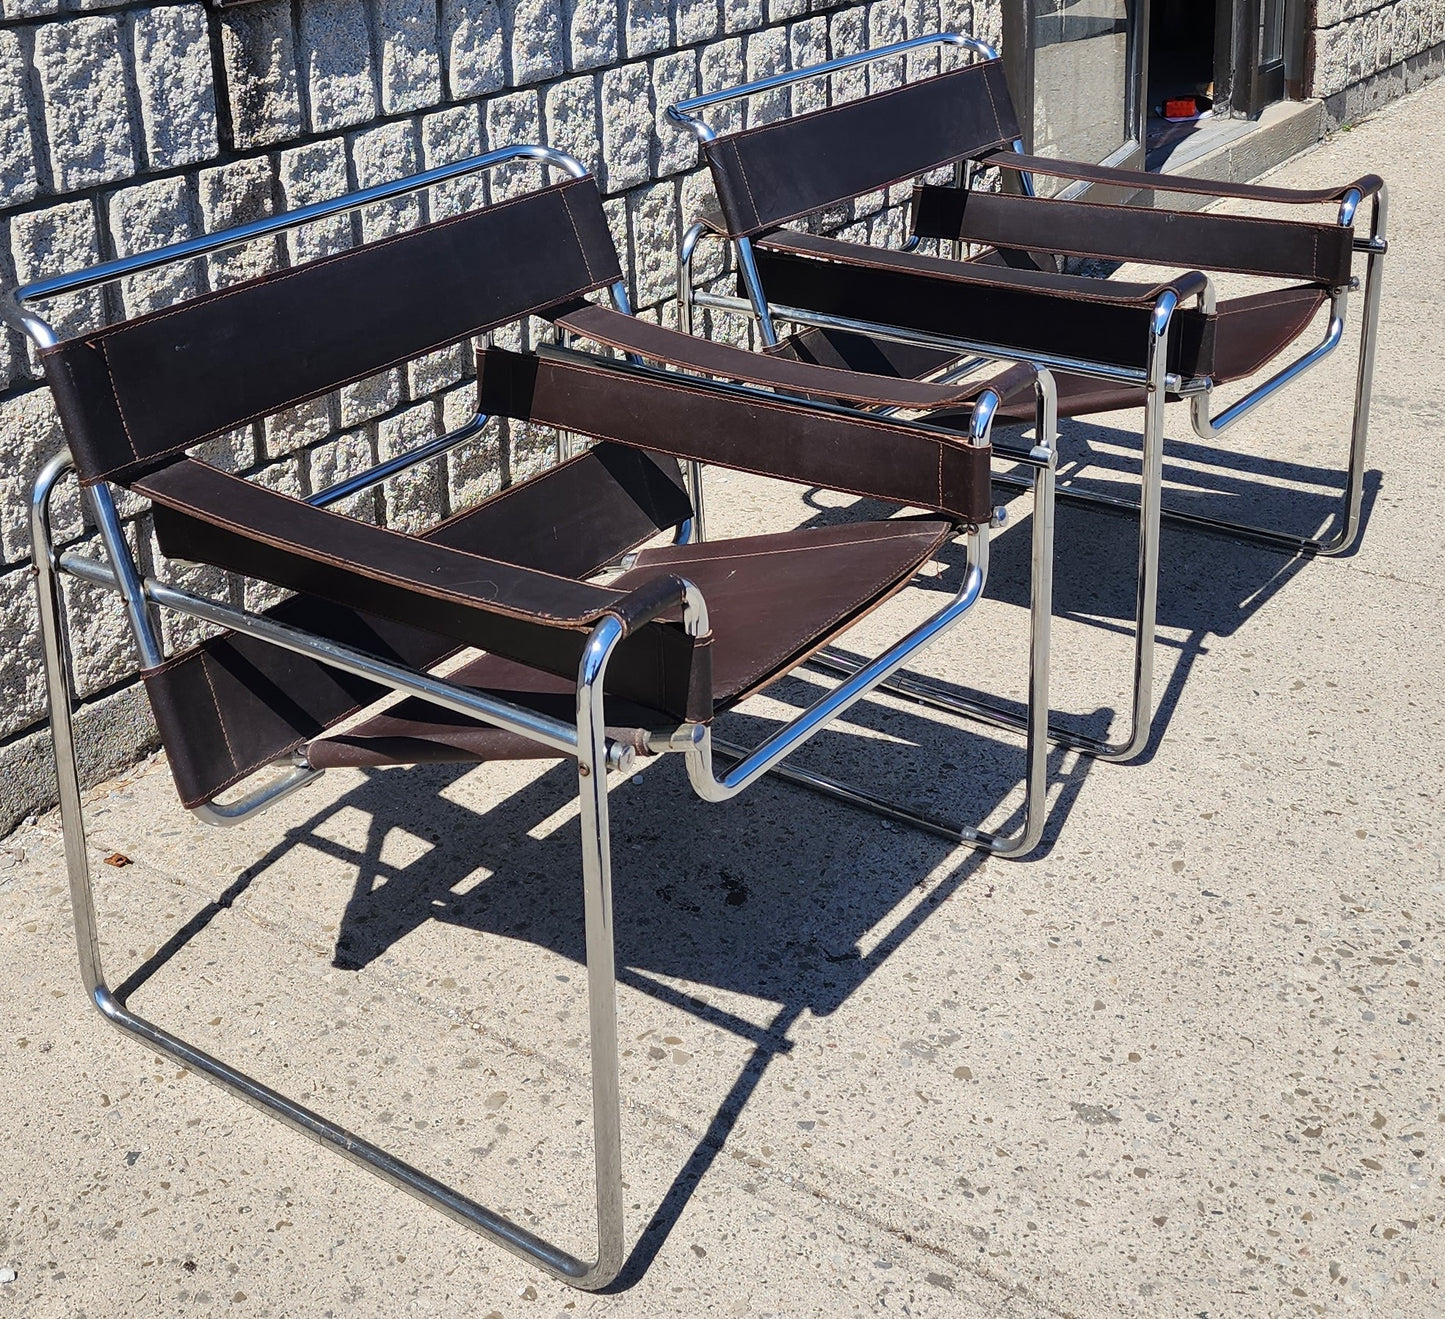 2 vintage Mid Century Modern Wassily chairs by Marcel Breuer for Knoll in brown leather